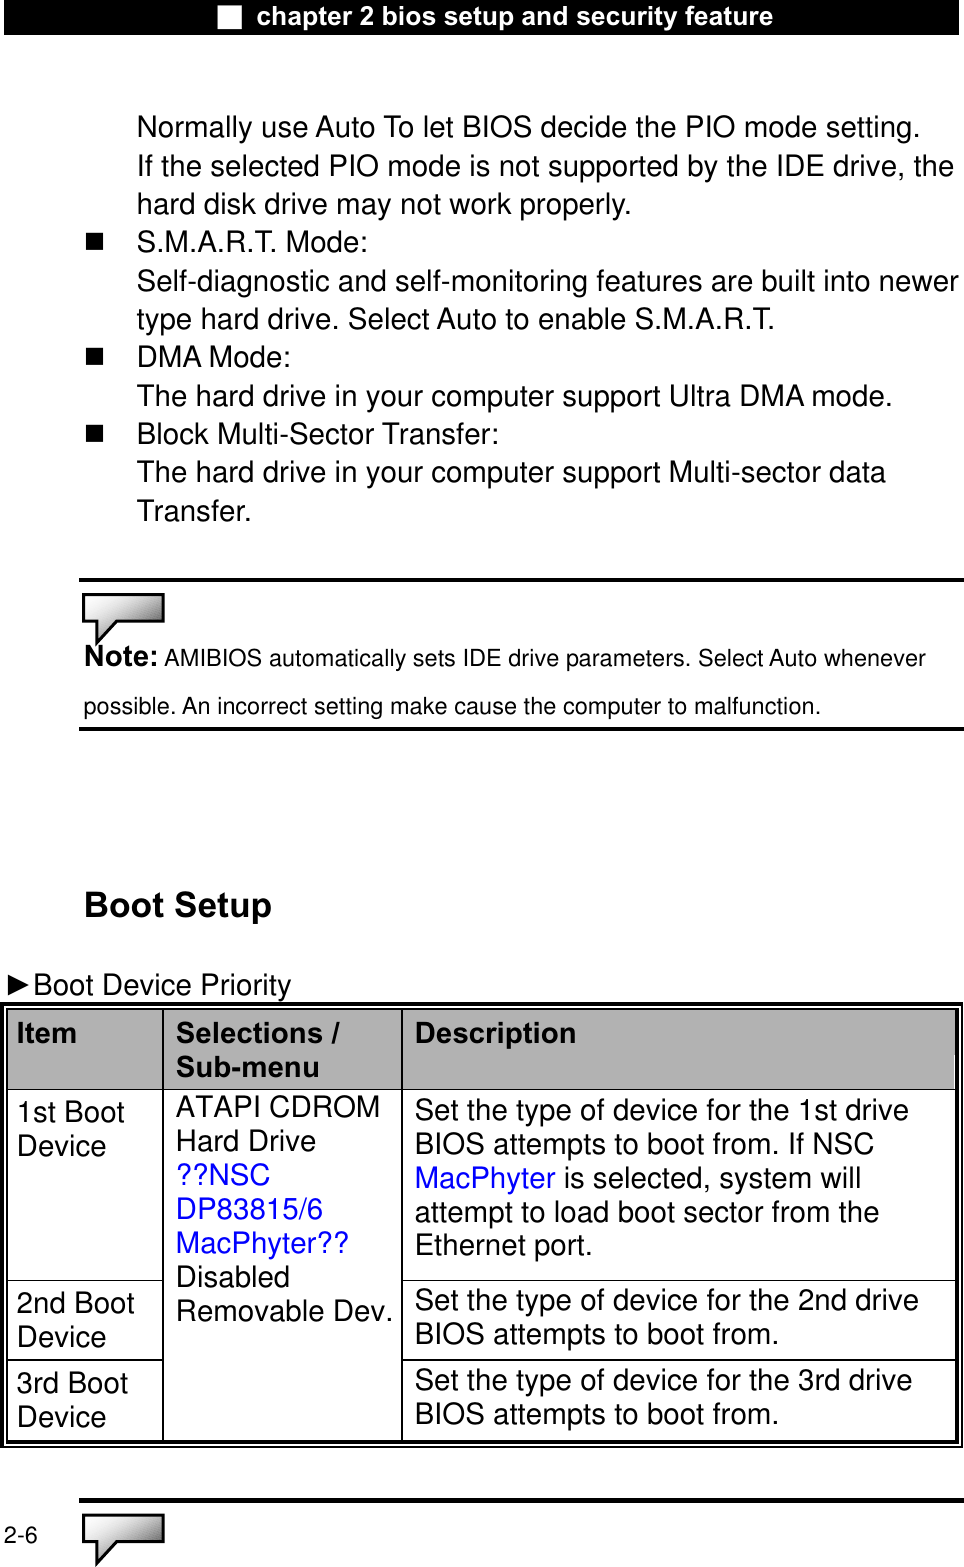 Ϯ chapter 2 bios setup and security featureNormally use Auto To let BIOS decide the PIO mode setting. If the selected PIO mode is not supported by the IDE drive, the hard disk drive may not work properly. S.M.A.R.T. Mode:Self-diagnostic and self-monitoring features are built into newertype hard drive. Select Auto to enable S.M.A.R.T.DMA Mode:The hard drive in your computer support Ultra DMA mode.Block Multi-Sector Transfer:The hard drive in your computer support Multi-sector dataTransfer.Note: AMIBIOS automatically sets IDE drive parameters. Select Auto wheneverpossible. An incorrect setting make cause the computer to malfunction.Boot Setup ŹBoot Device PriorityItem Selections /Sub-menuDescription1st Boot Device Set the type of device for the 1st driveBIOS attempts to boot from. If NSC MacPhyter is selected, system will attempt to load boot sector from the Ethernet port.2nd Boot DeviceSet the type of device for the 2nd driveBIOS attempts to boot from.3rd Boot DeviceATAPI CDROMHard Drive??NSCDP83815/6MacPhyter??DisabledRemovable Dev.Set the type of device for the 3rd driveBIOS attempts to boot from.2-6